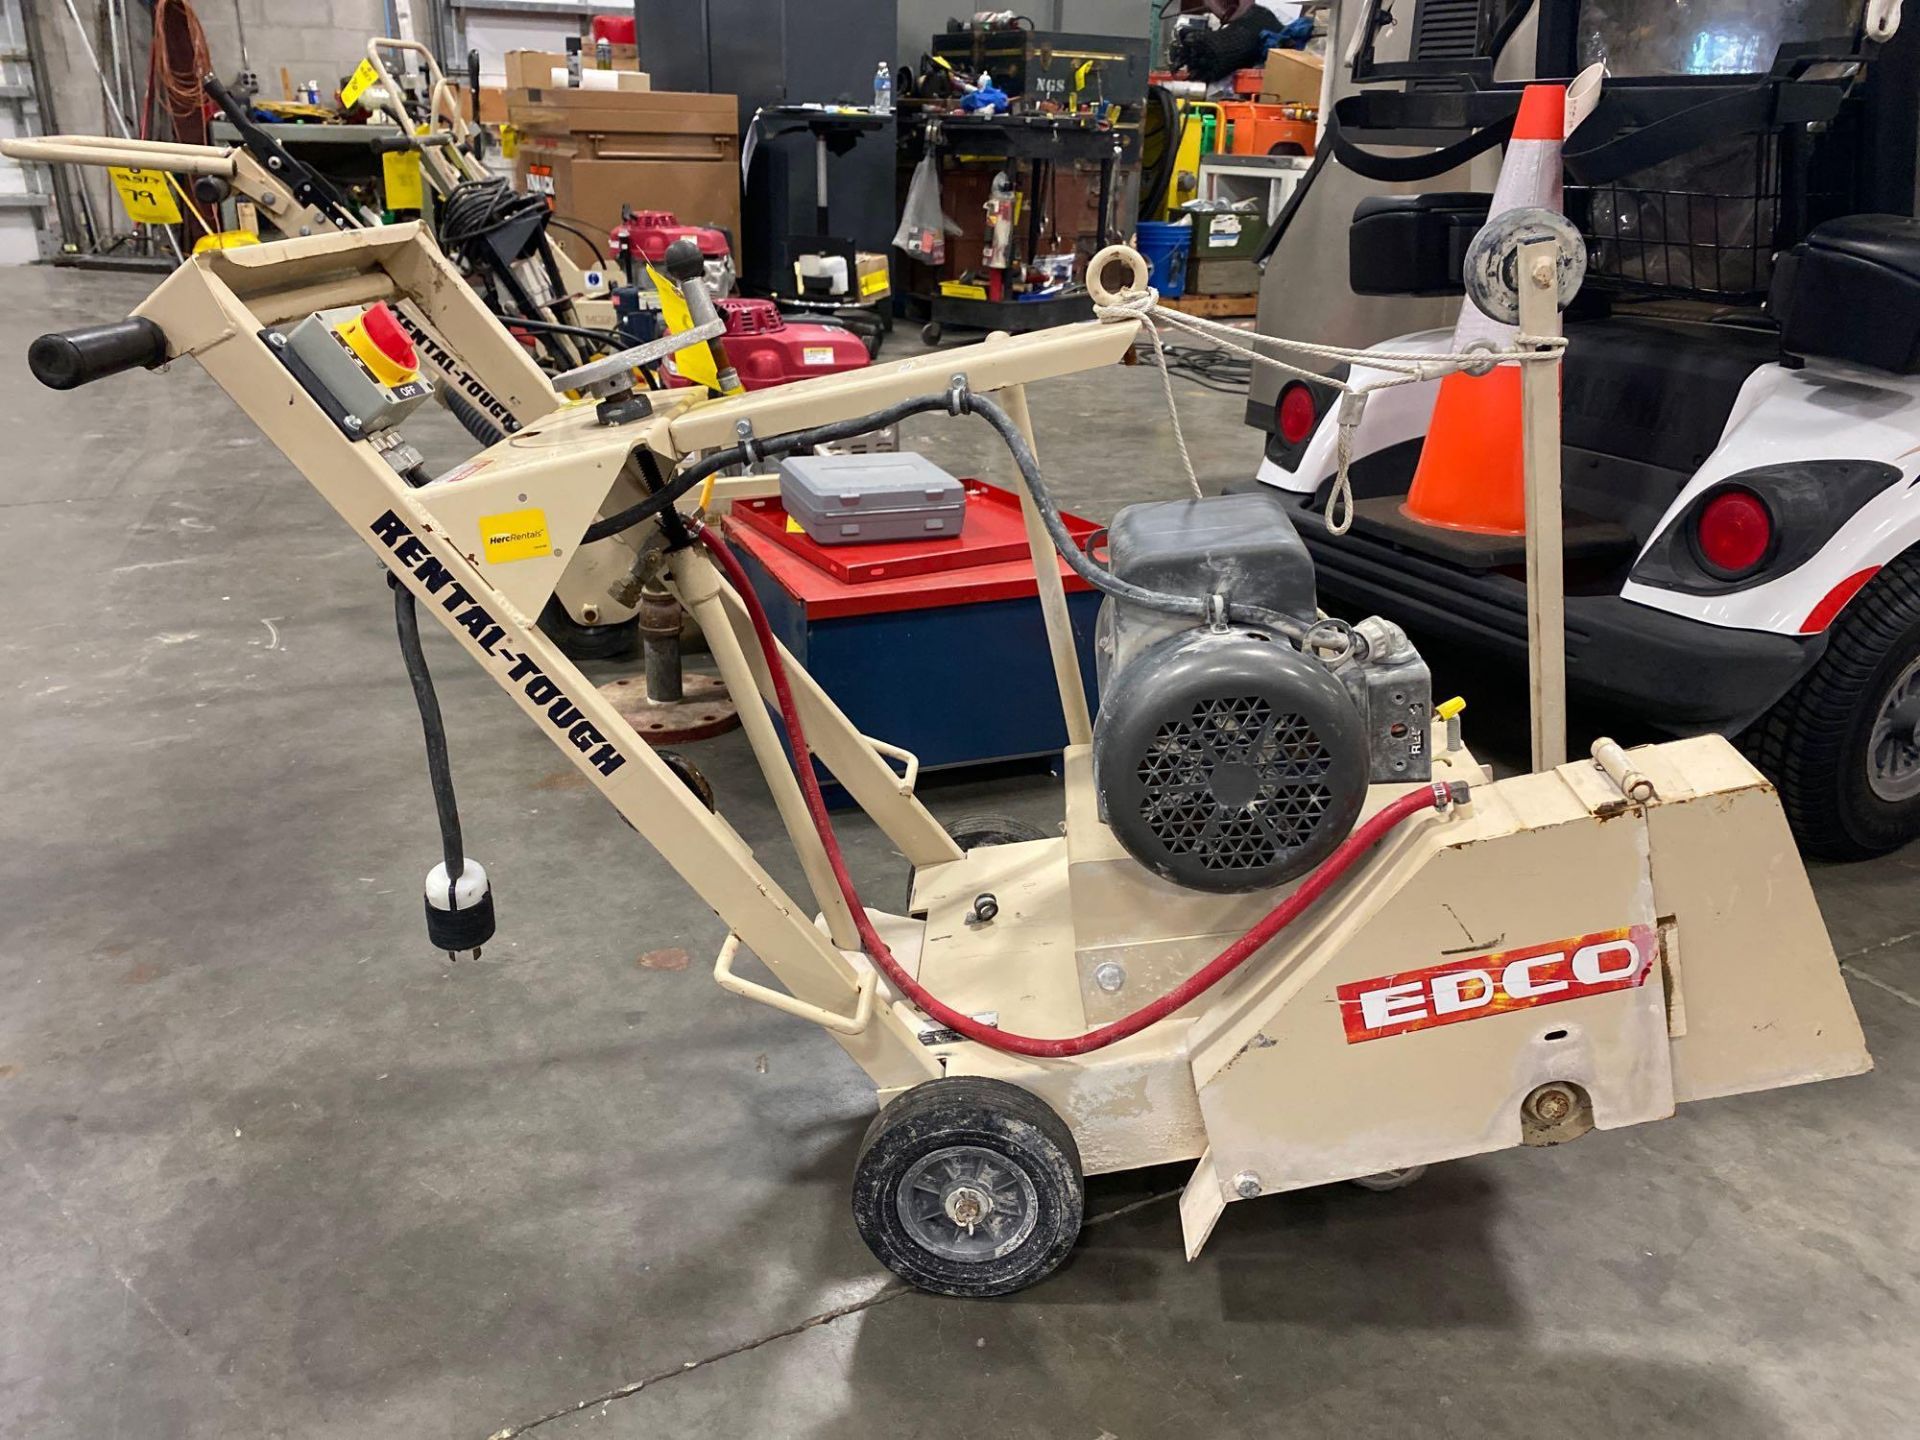 2017 EDCO DS-18-5 WALKBEHIND SAW SUPPORT EQUIPMENT - Image 11 of 20